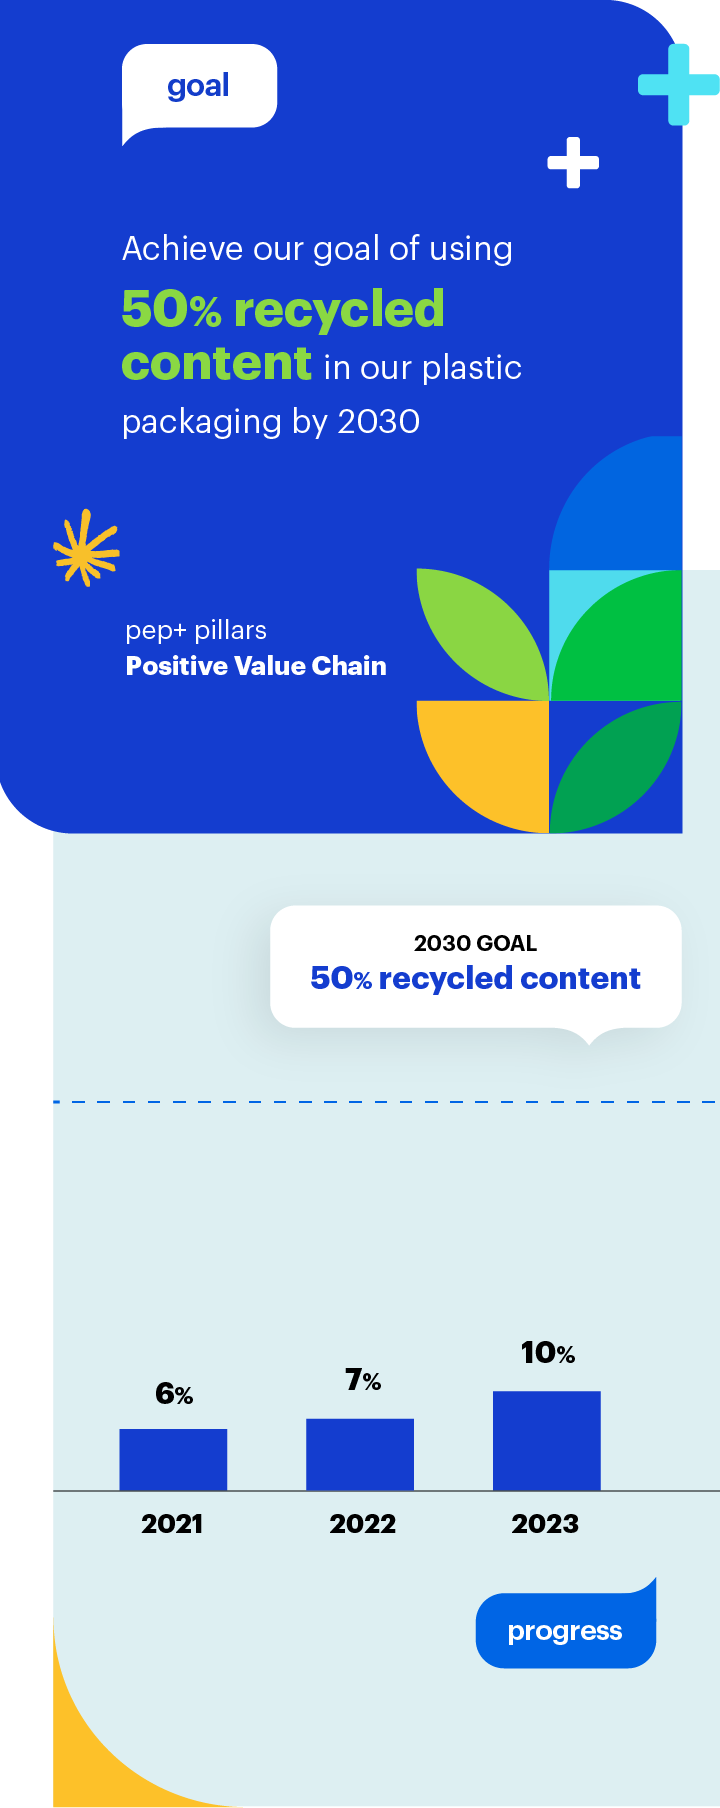 Goal: Achieve our goal of using 50% recycled content in our plastic packaging